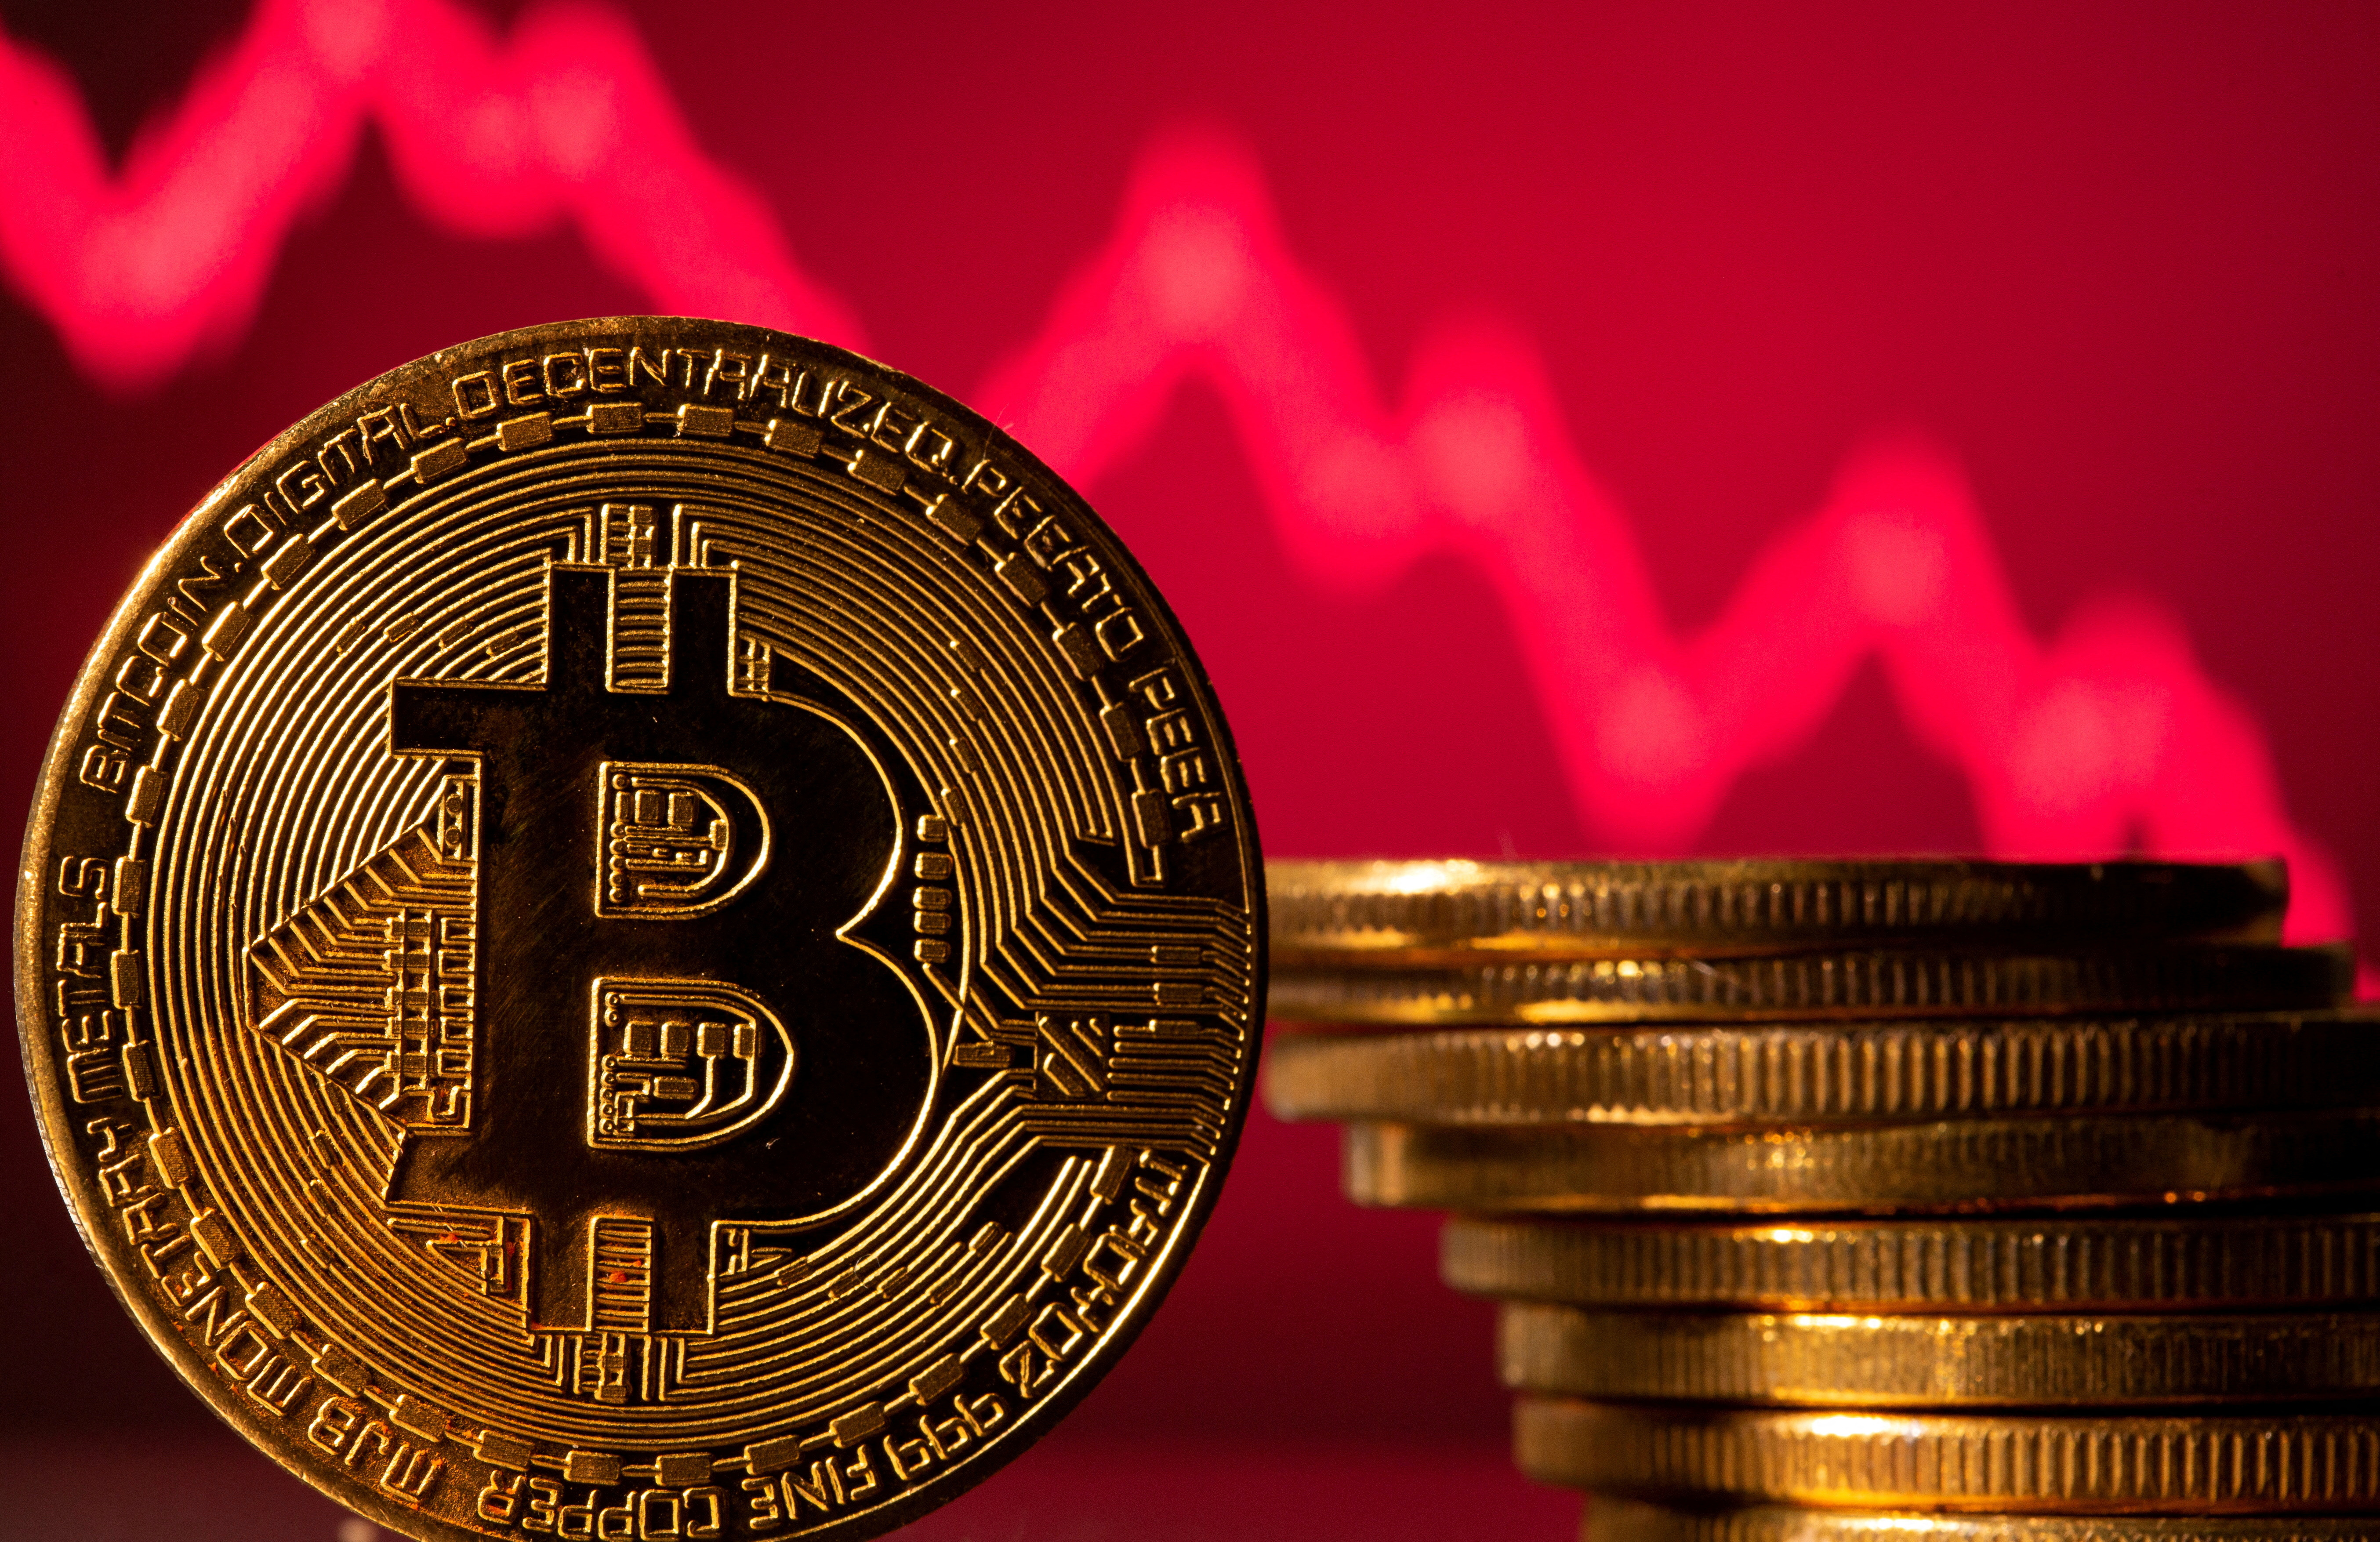 FILE PHOTO: A representation of bitcoin is seen in front of a stock graph in this illustration taken May 19, 2021. REUTERS/Dado Ruvic/Illustration//File Photo